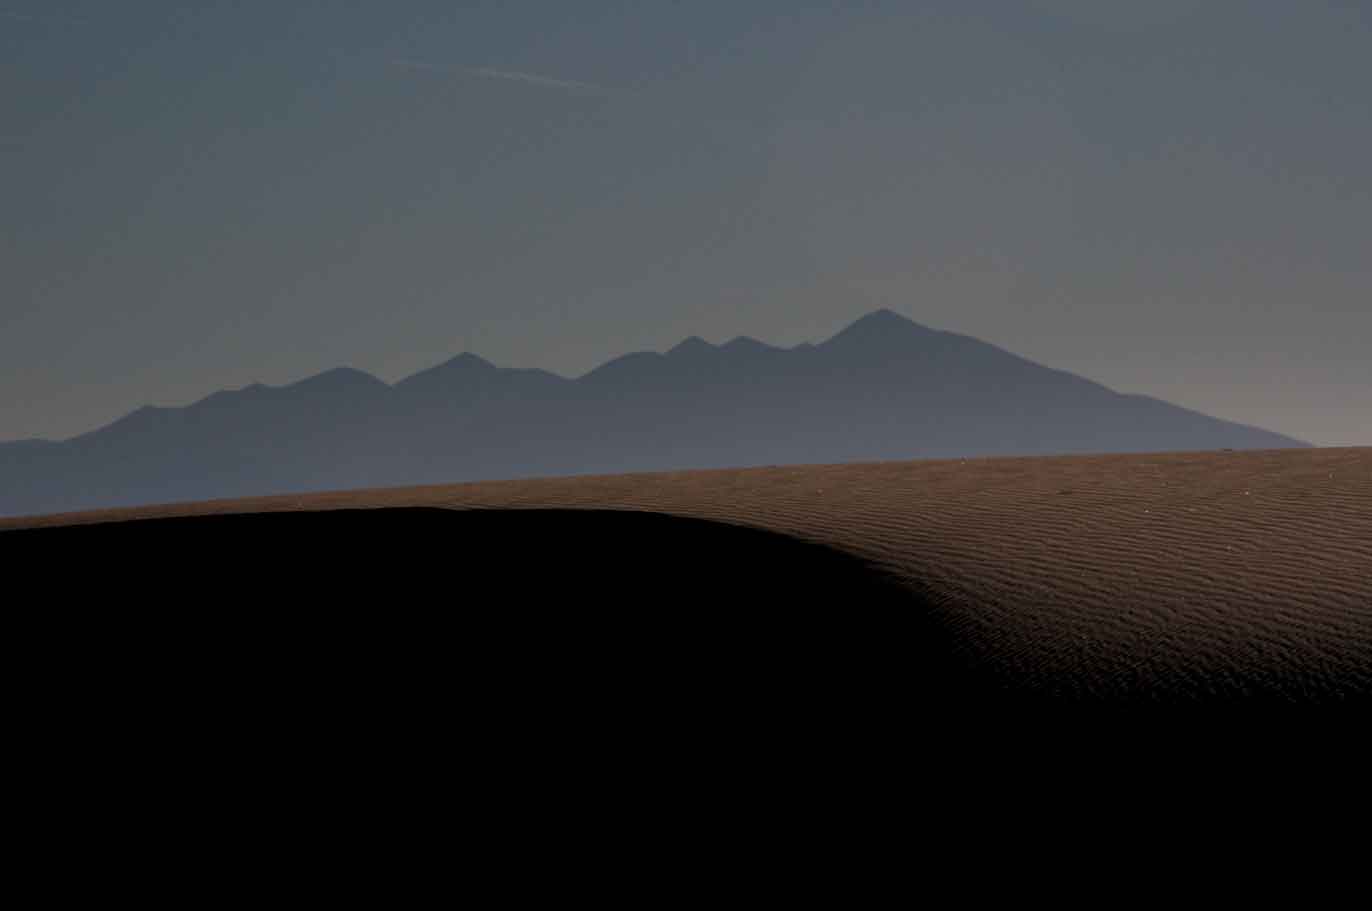 Sand dune in the Arizona high desert, on the Navajo Nation with the San Francisco Peaks in the distance